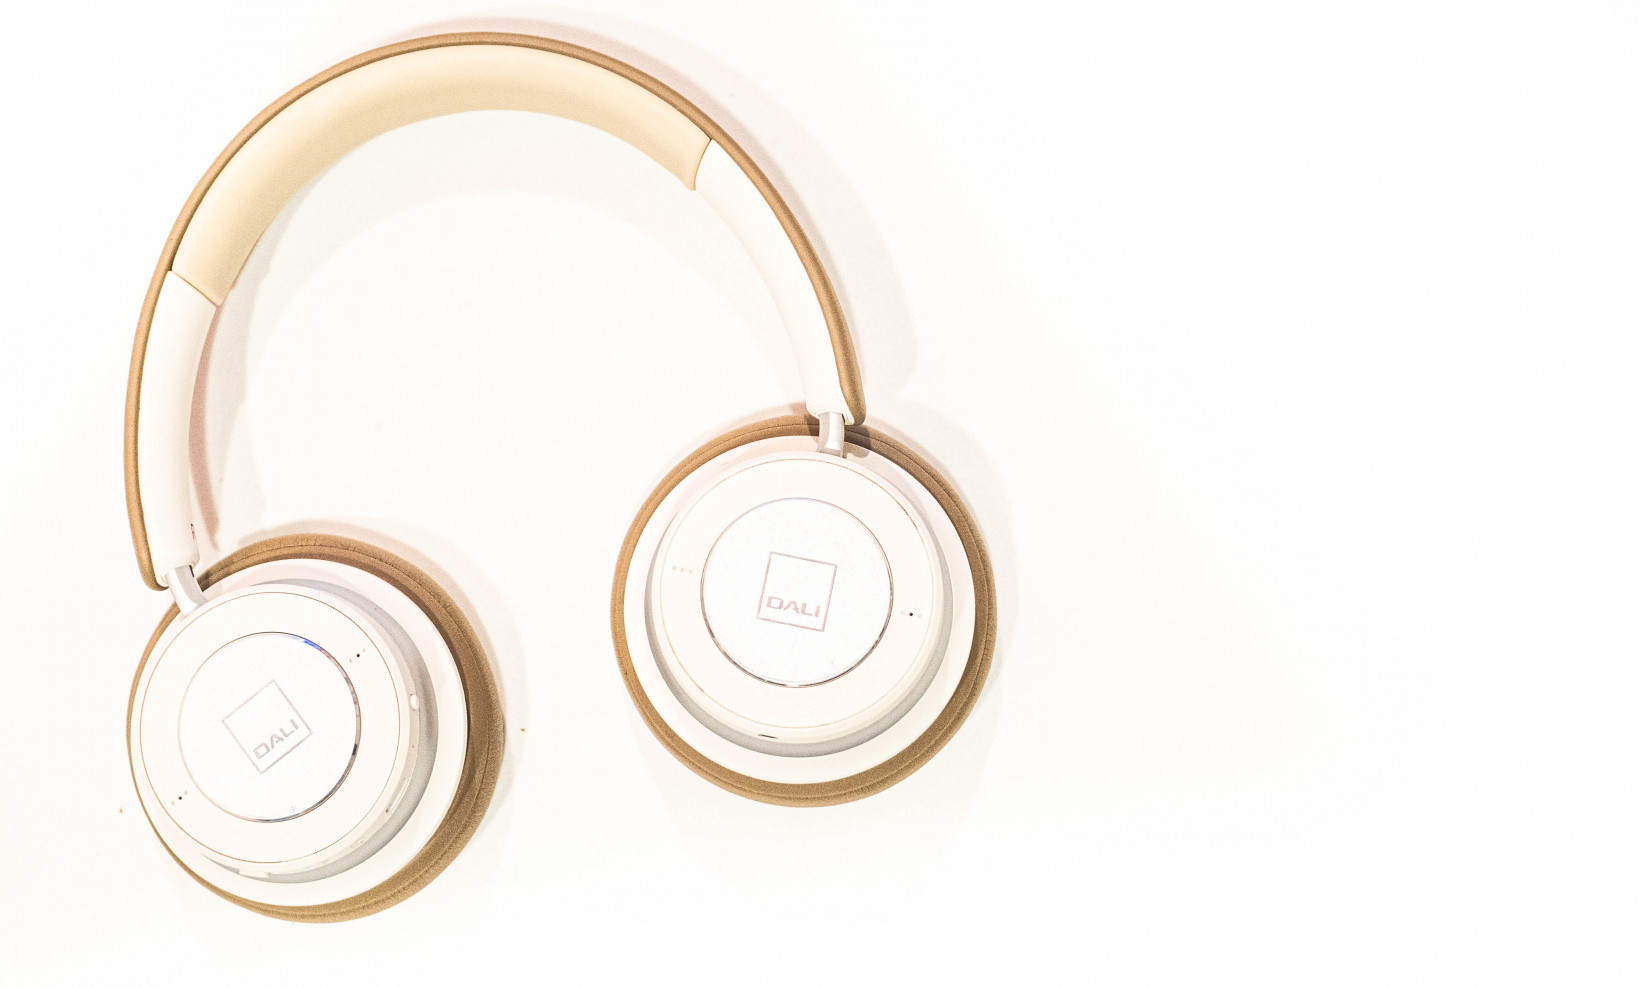 Review: Dali’s IO-6 are a new contender for best noise-canceling headphones 2